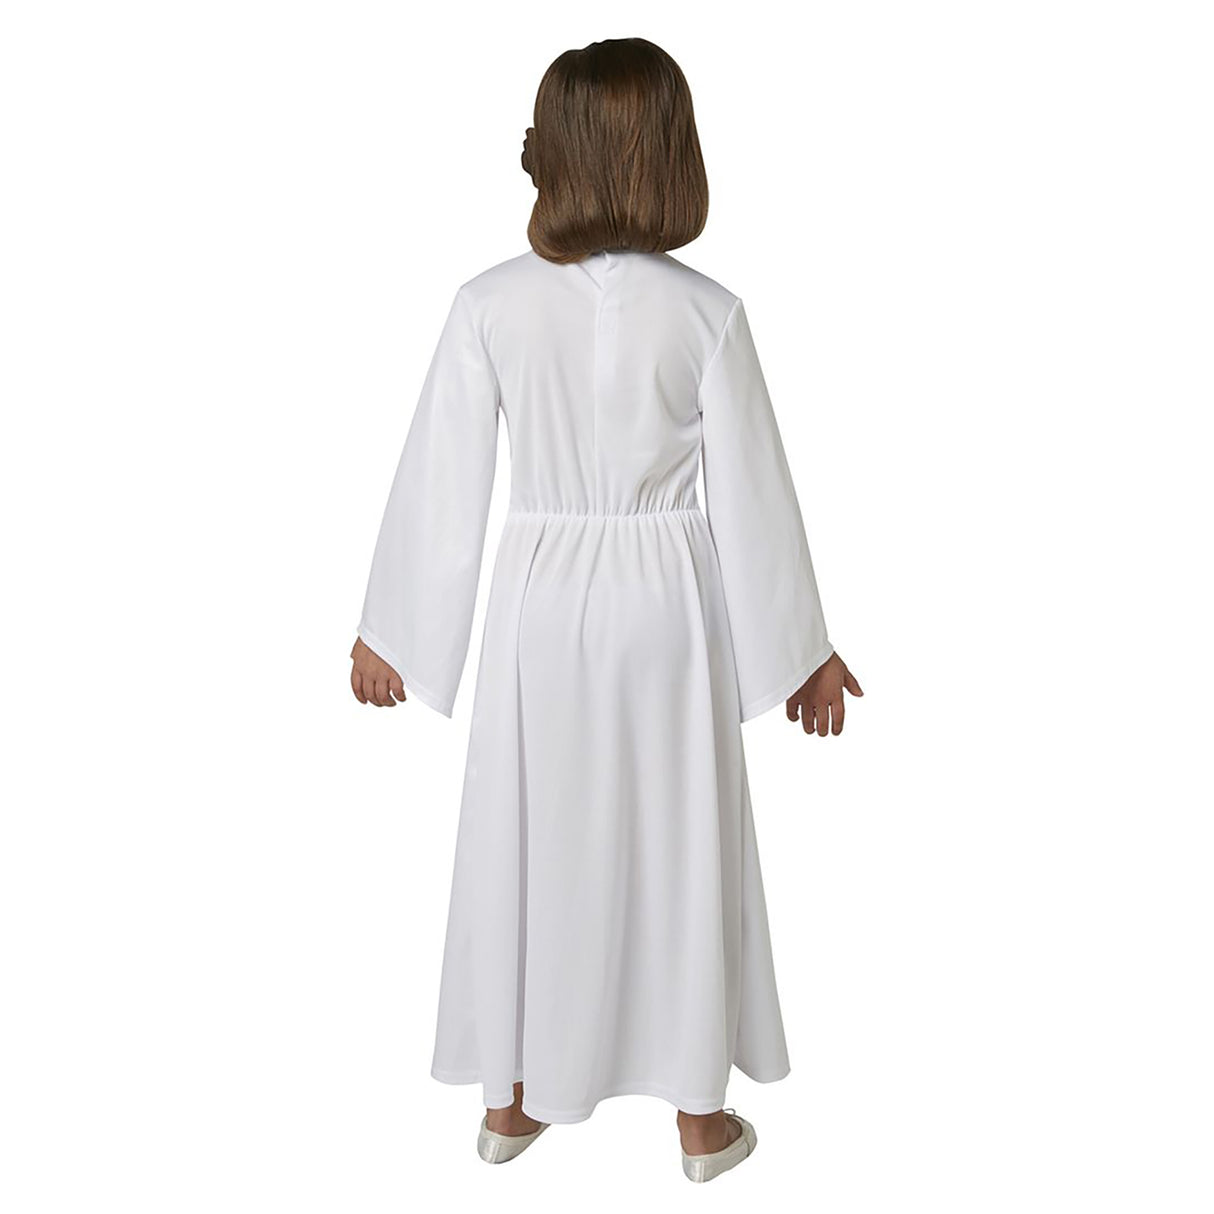 Rubies Star Wars Princess Leia Deluxe Child Costume, White (5-7 years)